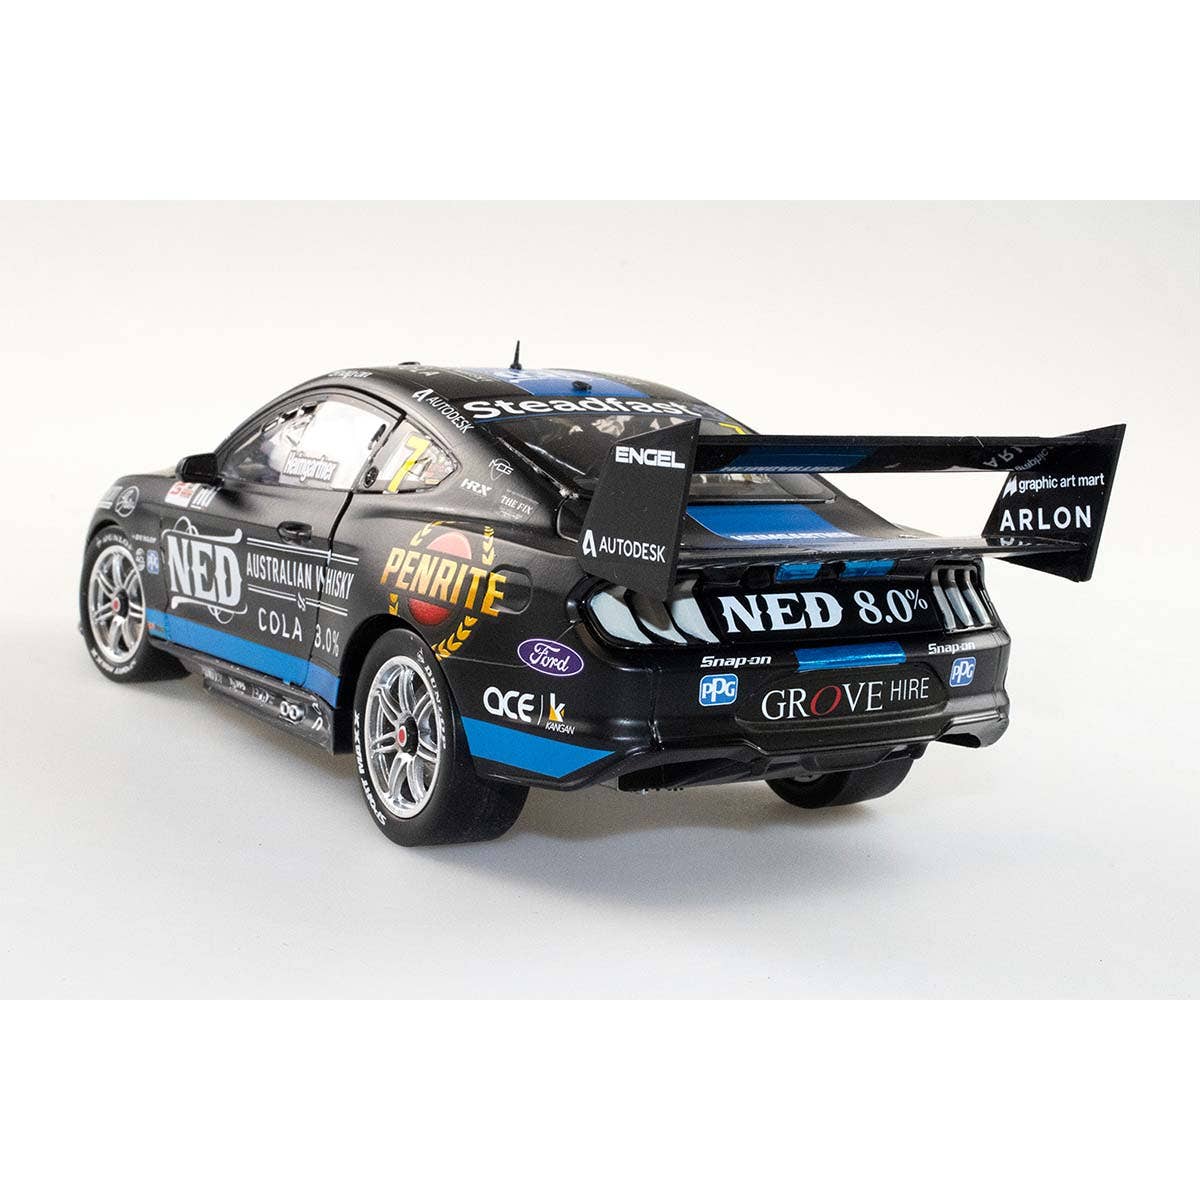 FORD GT MUSTANG V8 SUPERCAR NED RACING - ANDRE HEIMGARTNER #7 - NTI Townsville 500 - 1:43 Scale Diecast Model Car